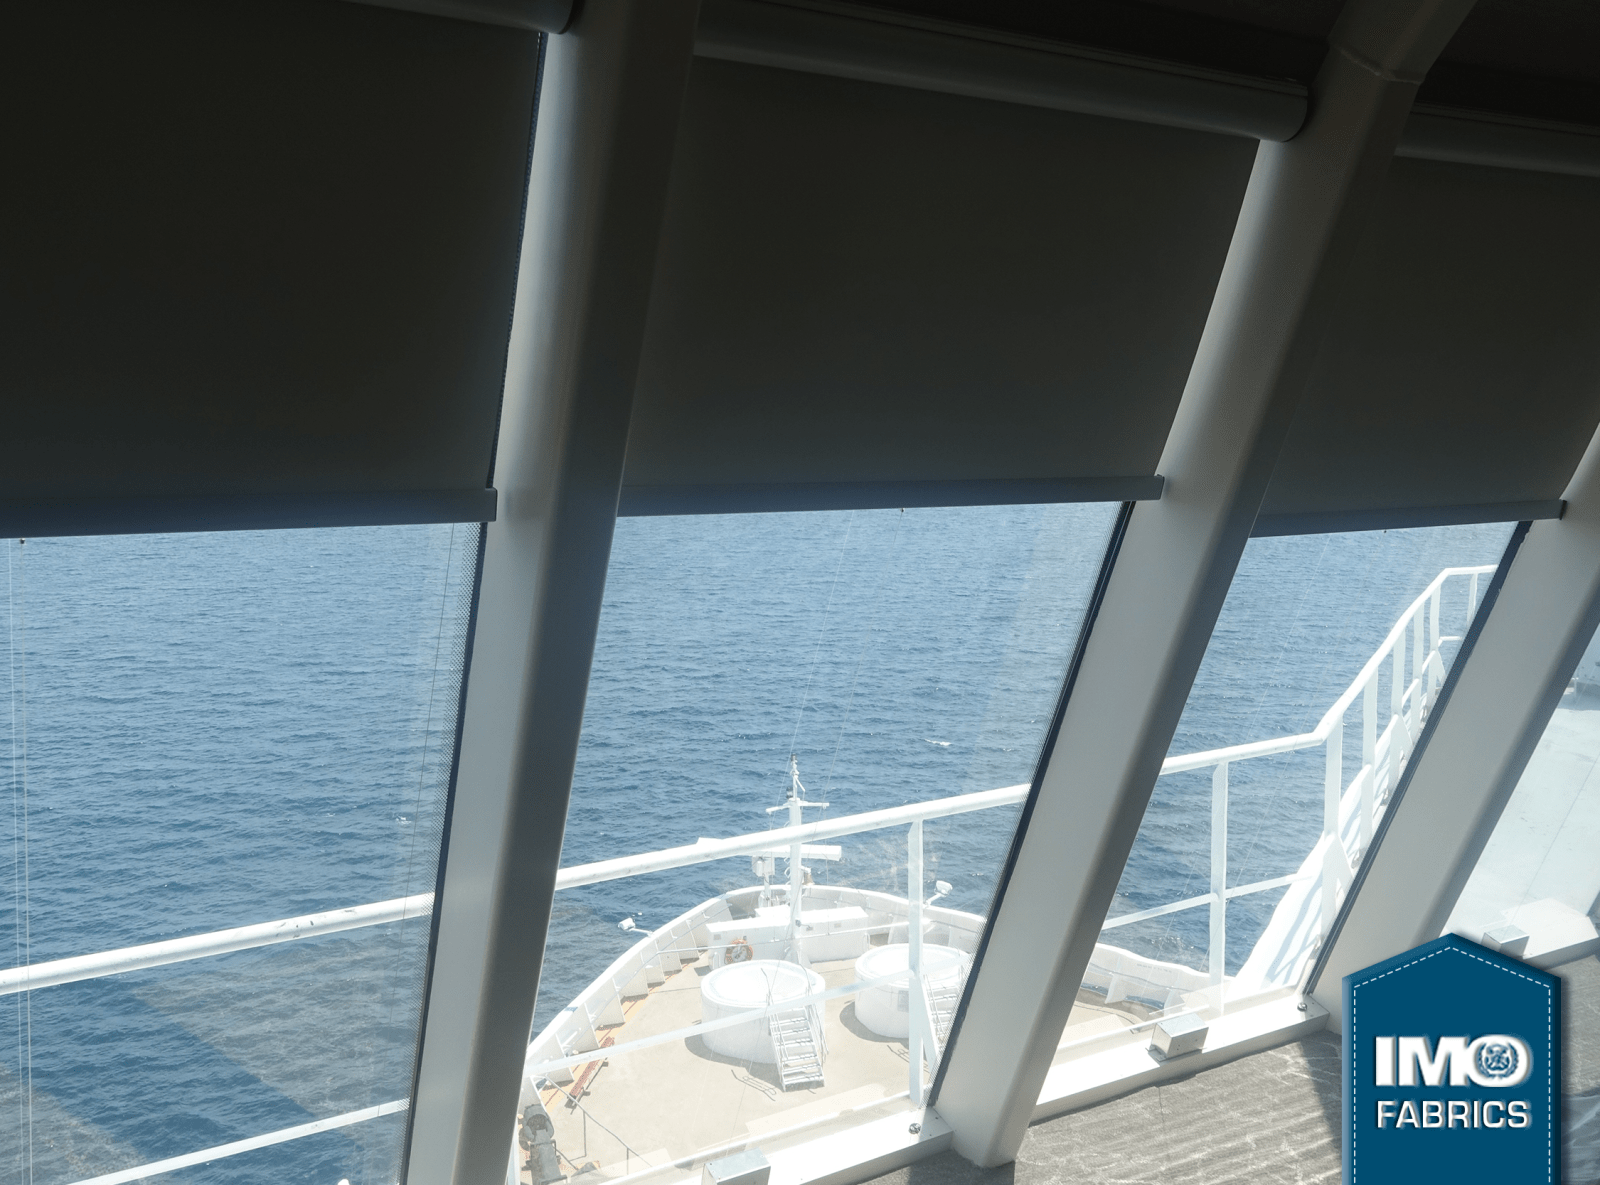 Solarglide Marine Blackout blinds display on ship